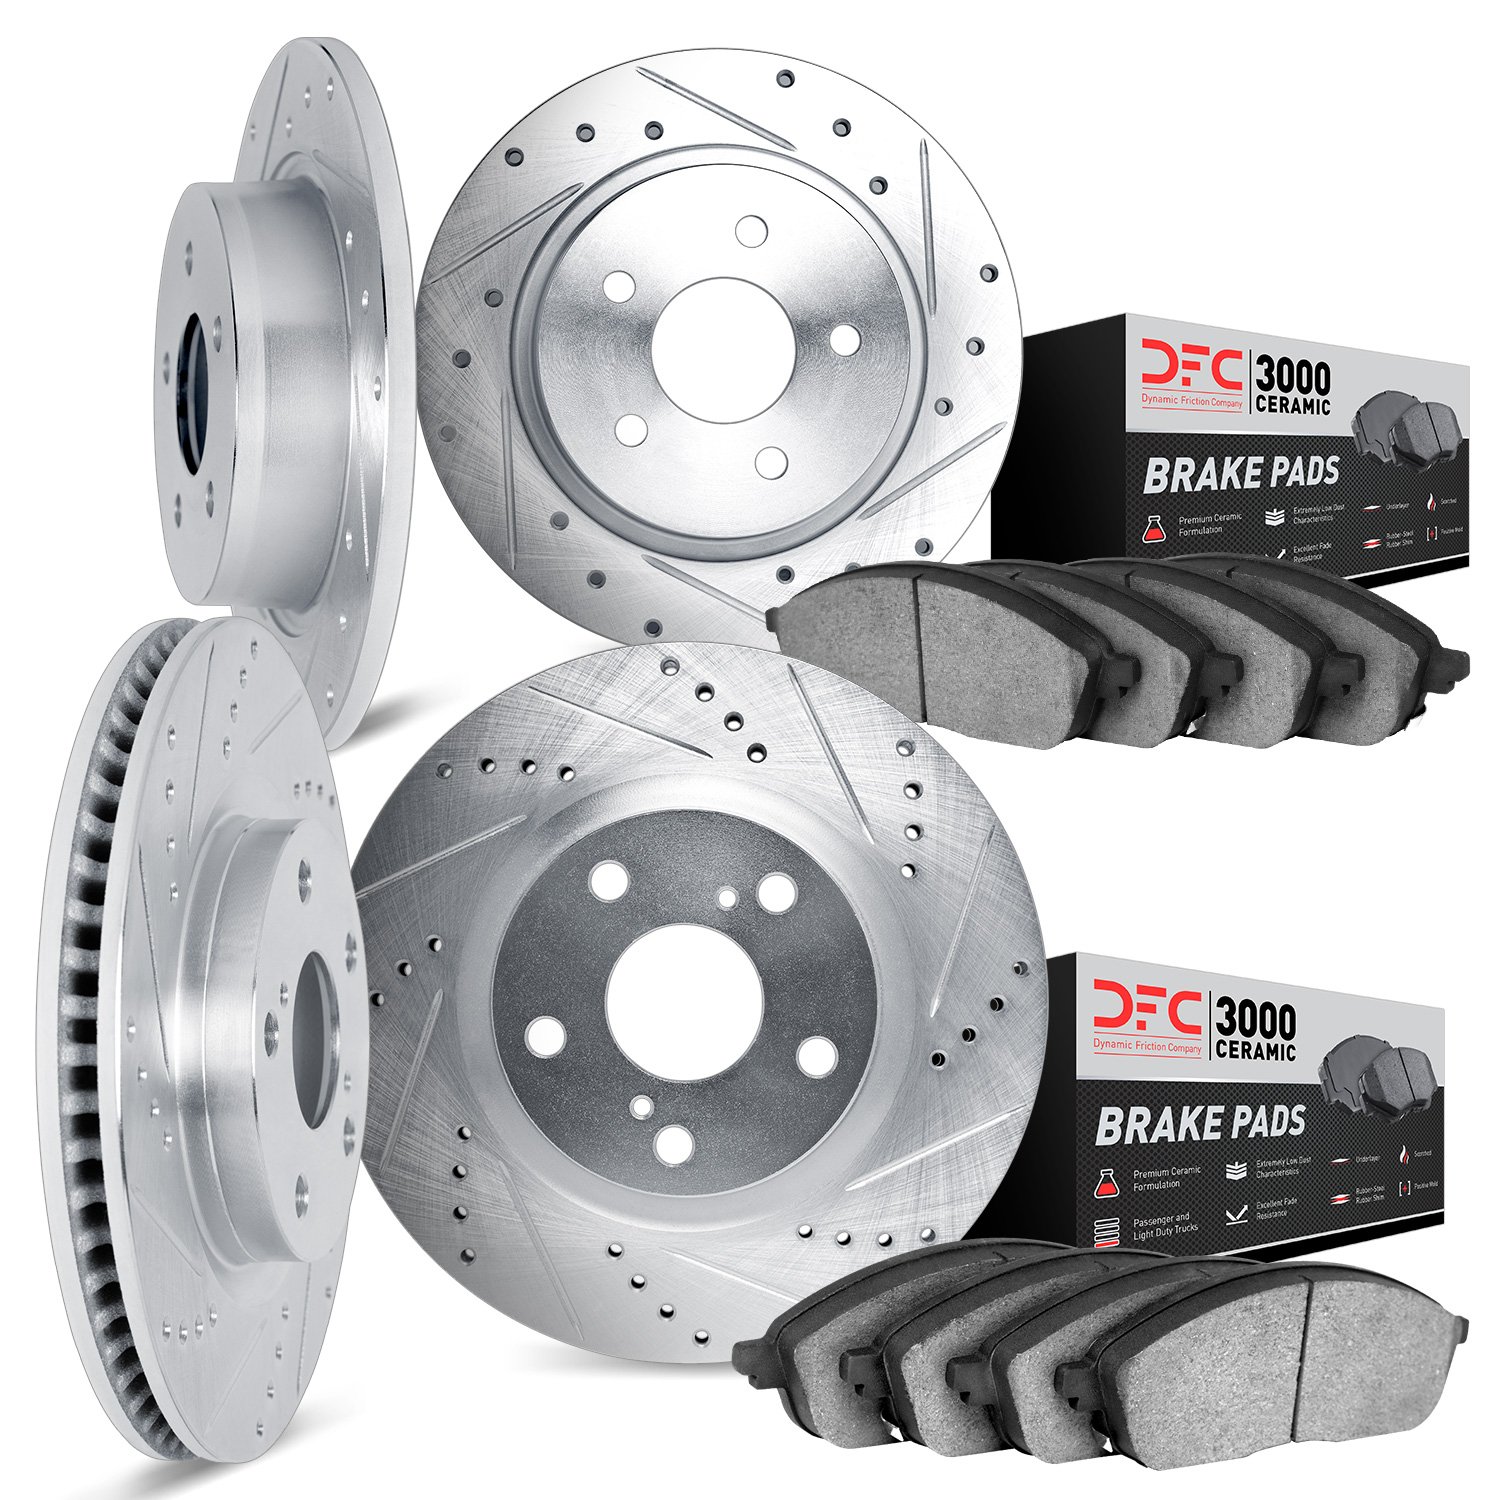 7304-54030 Drilled/Slotted Brake Rotor with 3000-Series Ceramic Brake Pads Kit [Silver], 2000-2004 Ford/Lincoln/Mercury/Mazda, P